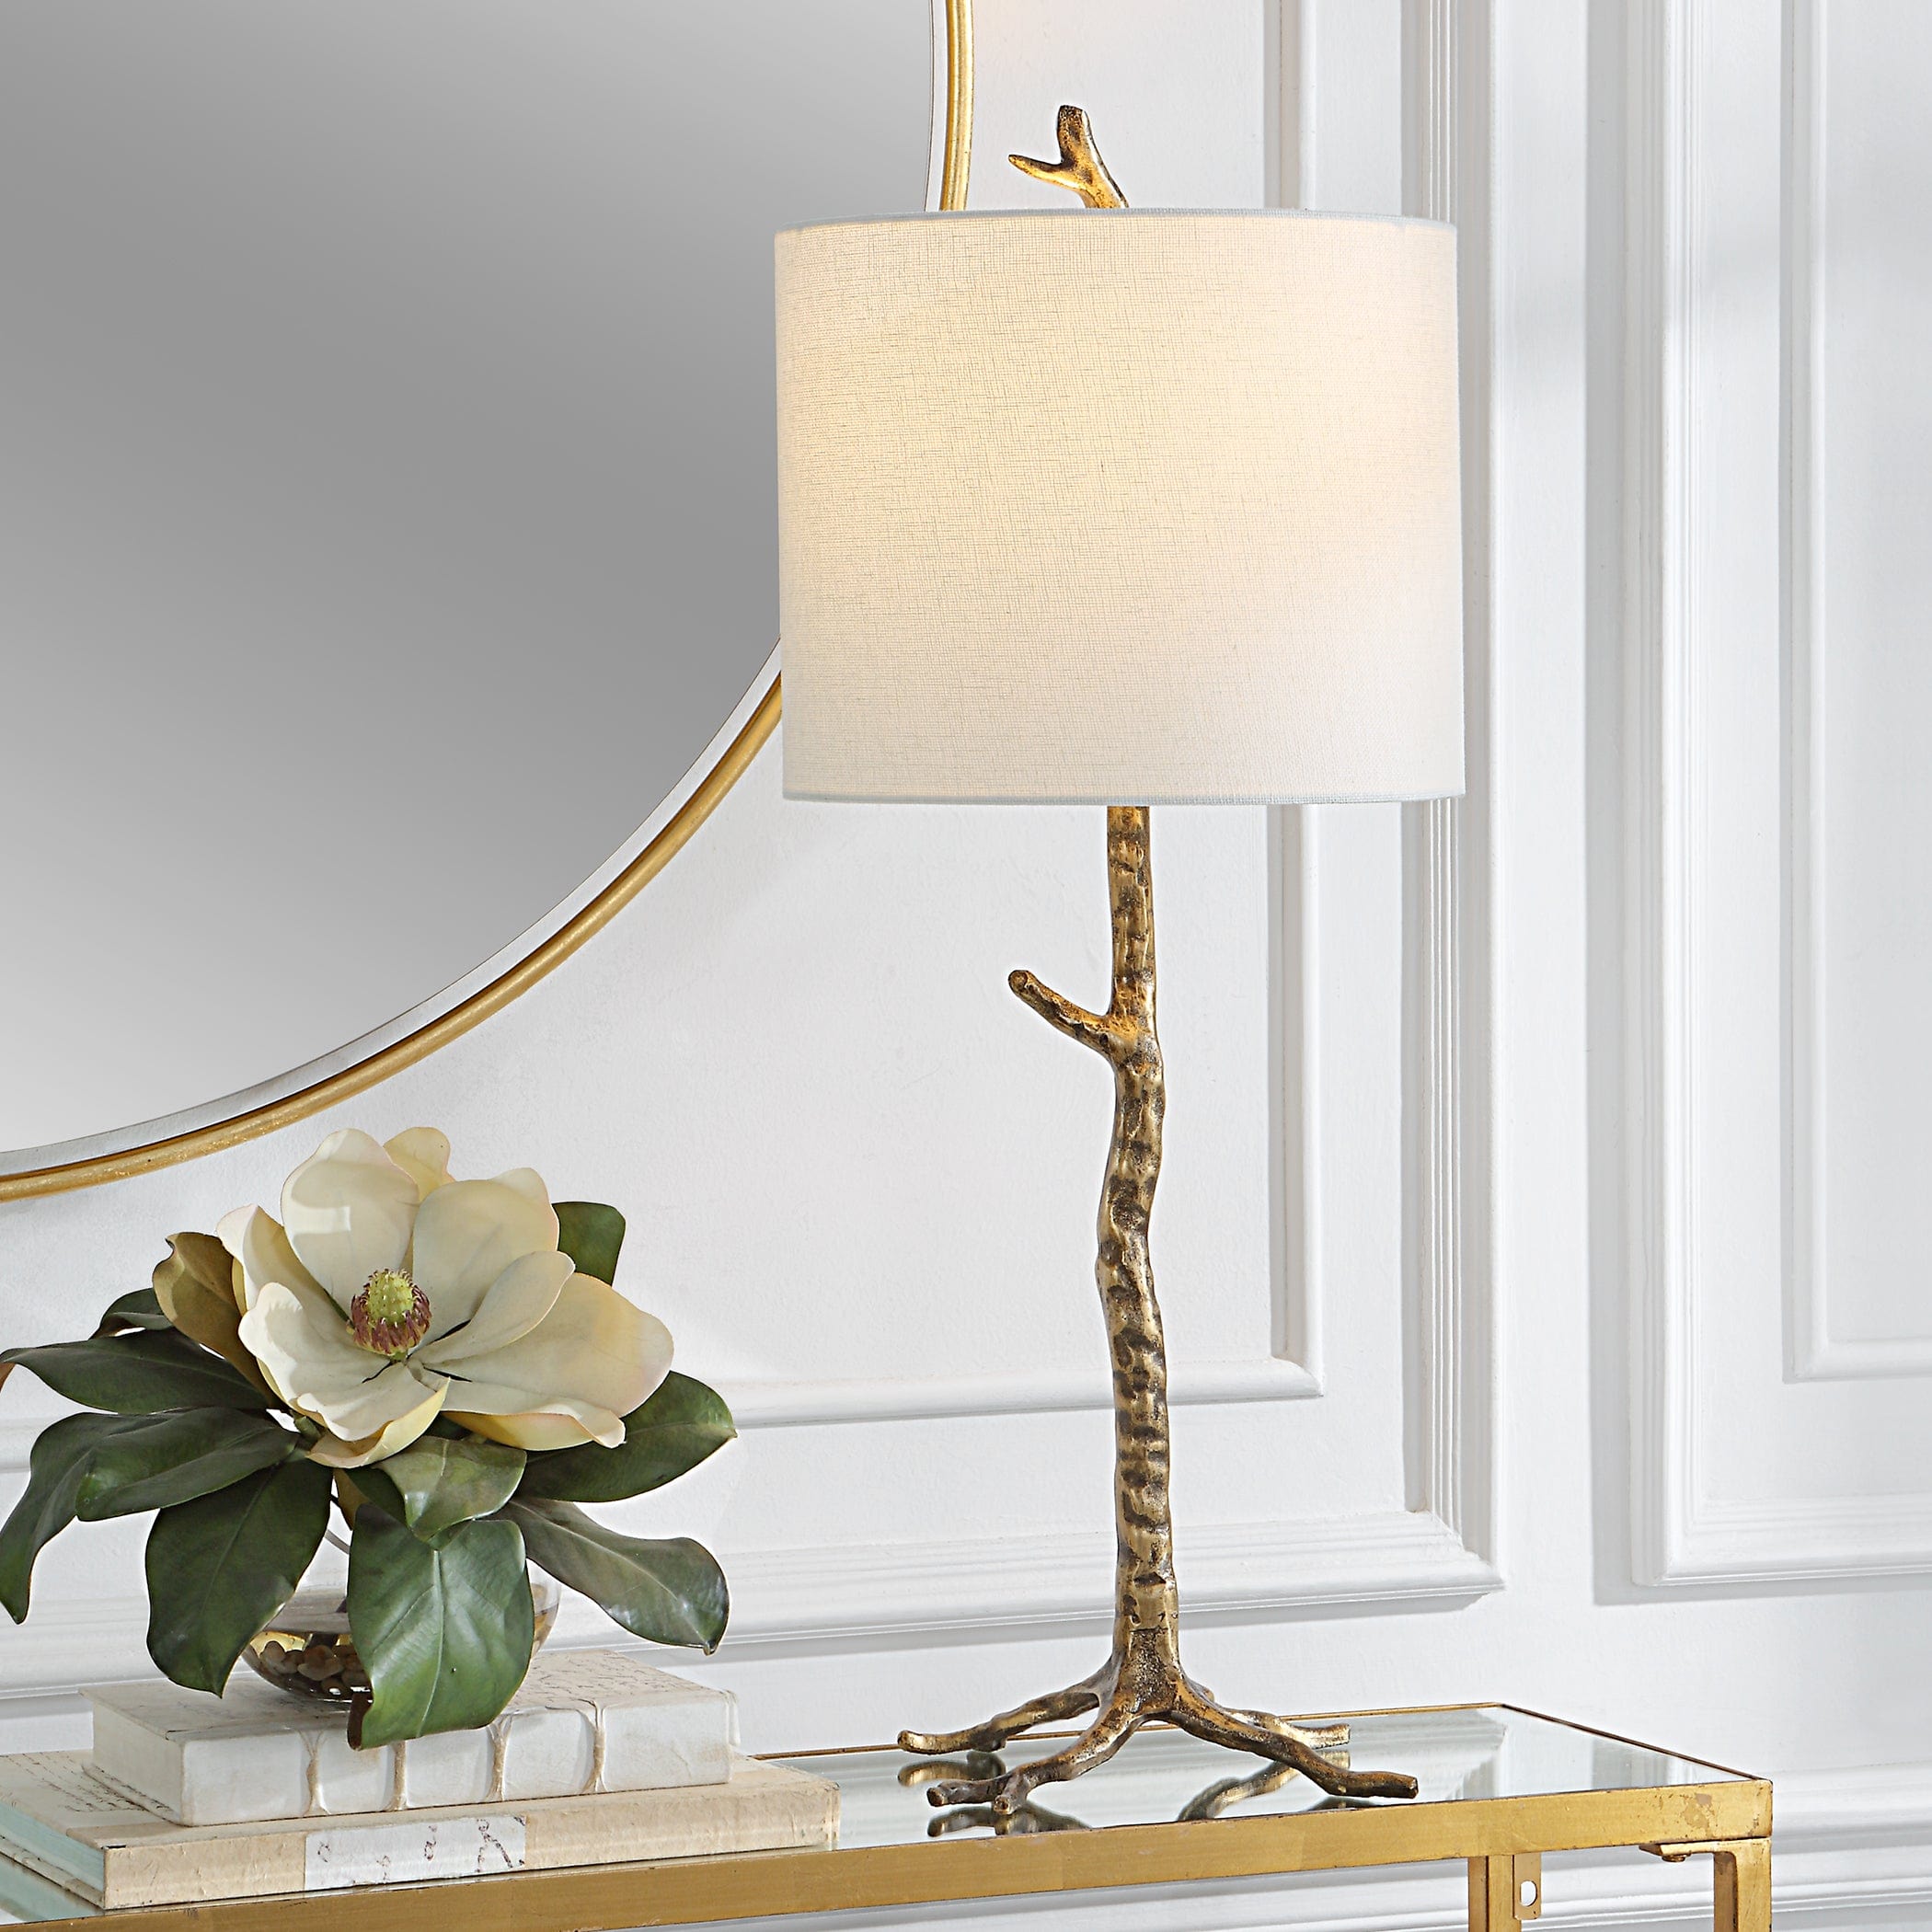 Table Lamp - W26097-1 Uttermost